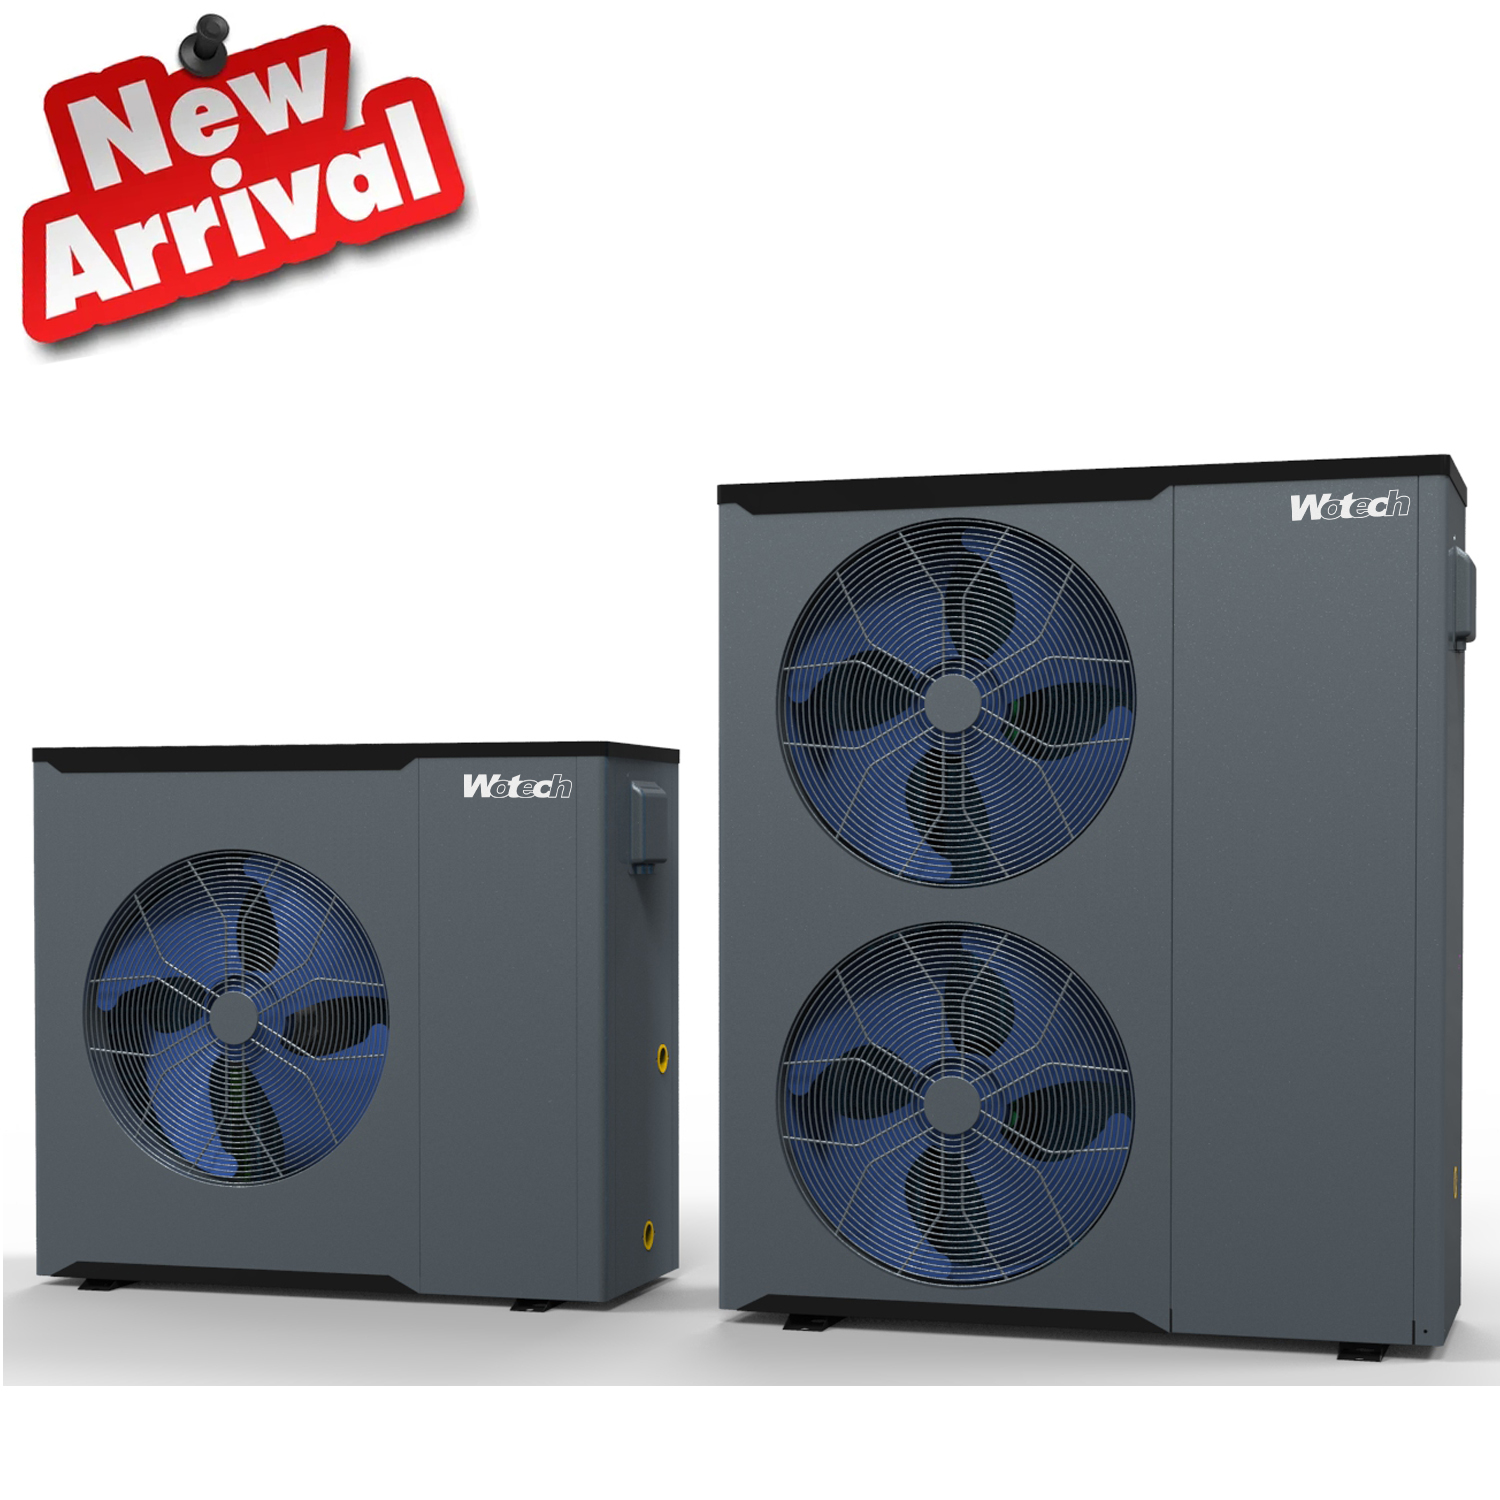 R32 A+++ Residentail Air Source Heat Pump with Smart Control System